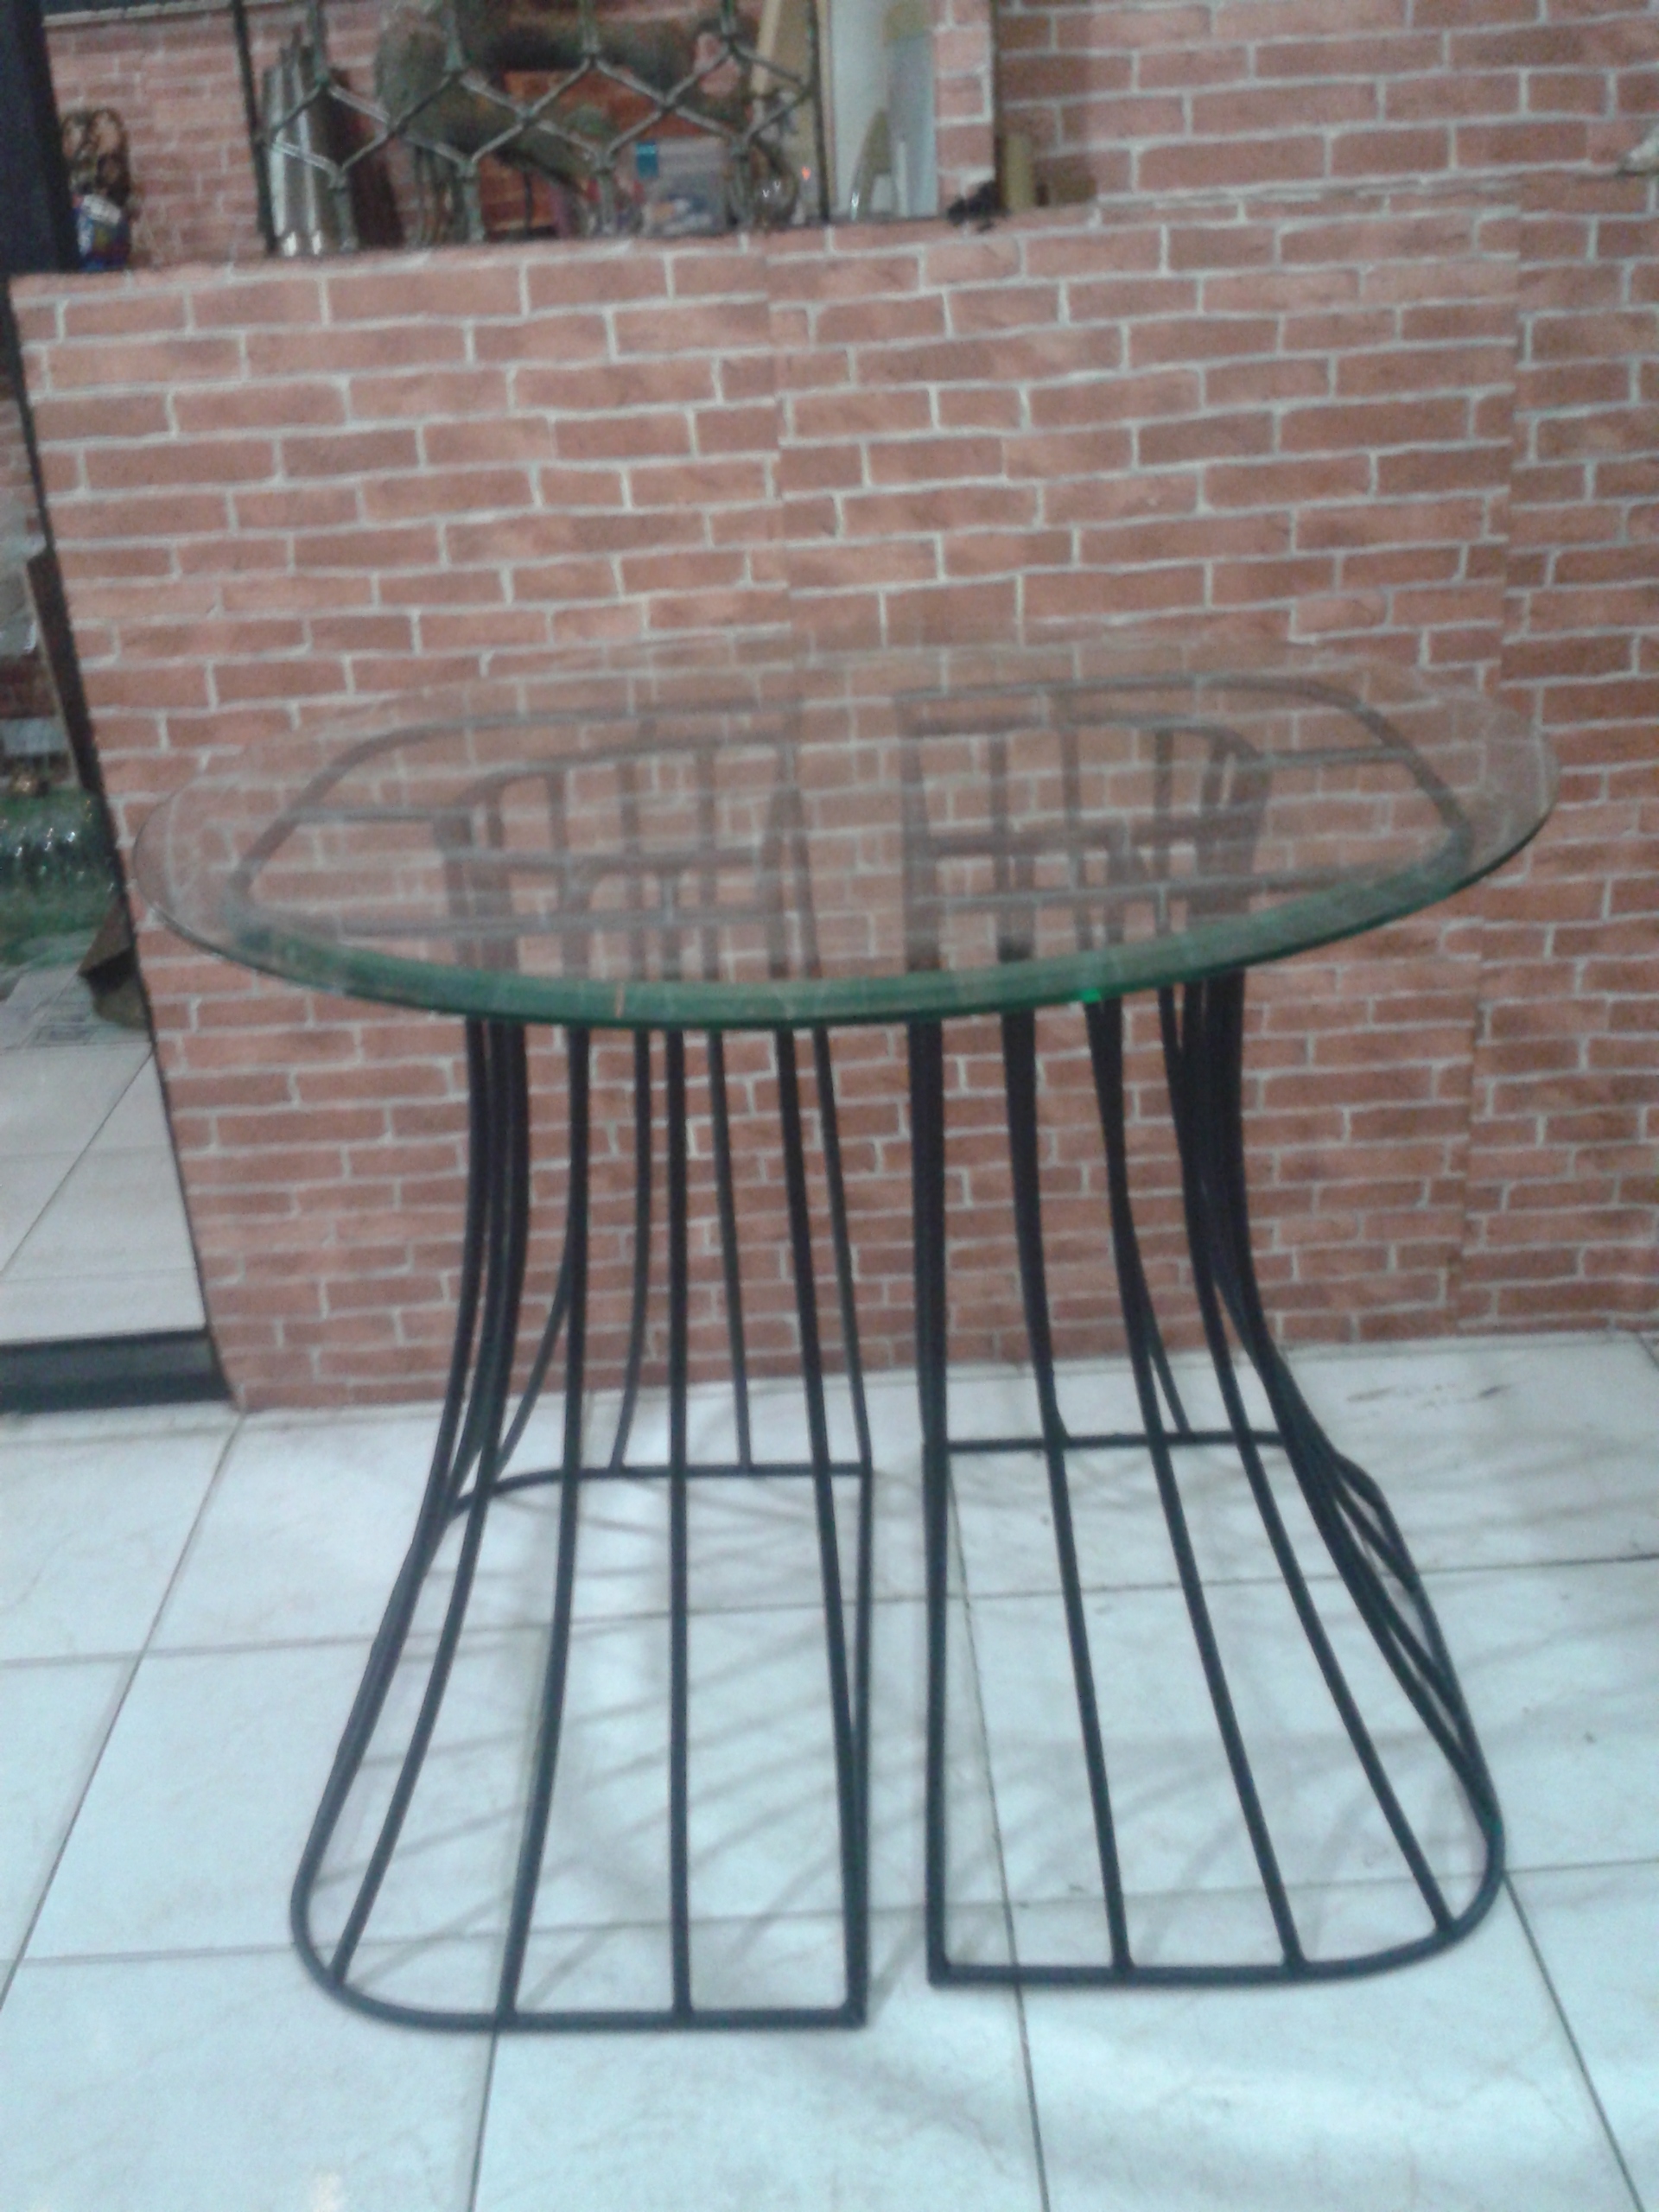 Iron table code IRA003 size high 66 cm. top 80 cm.